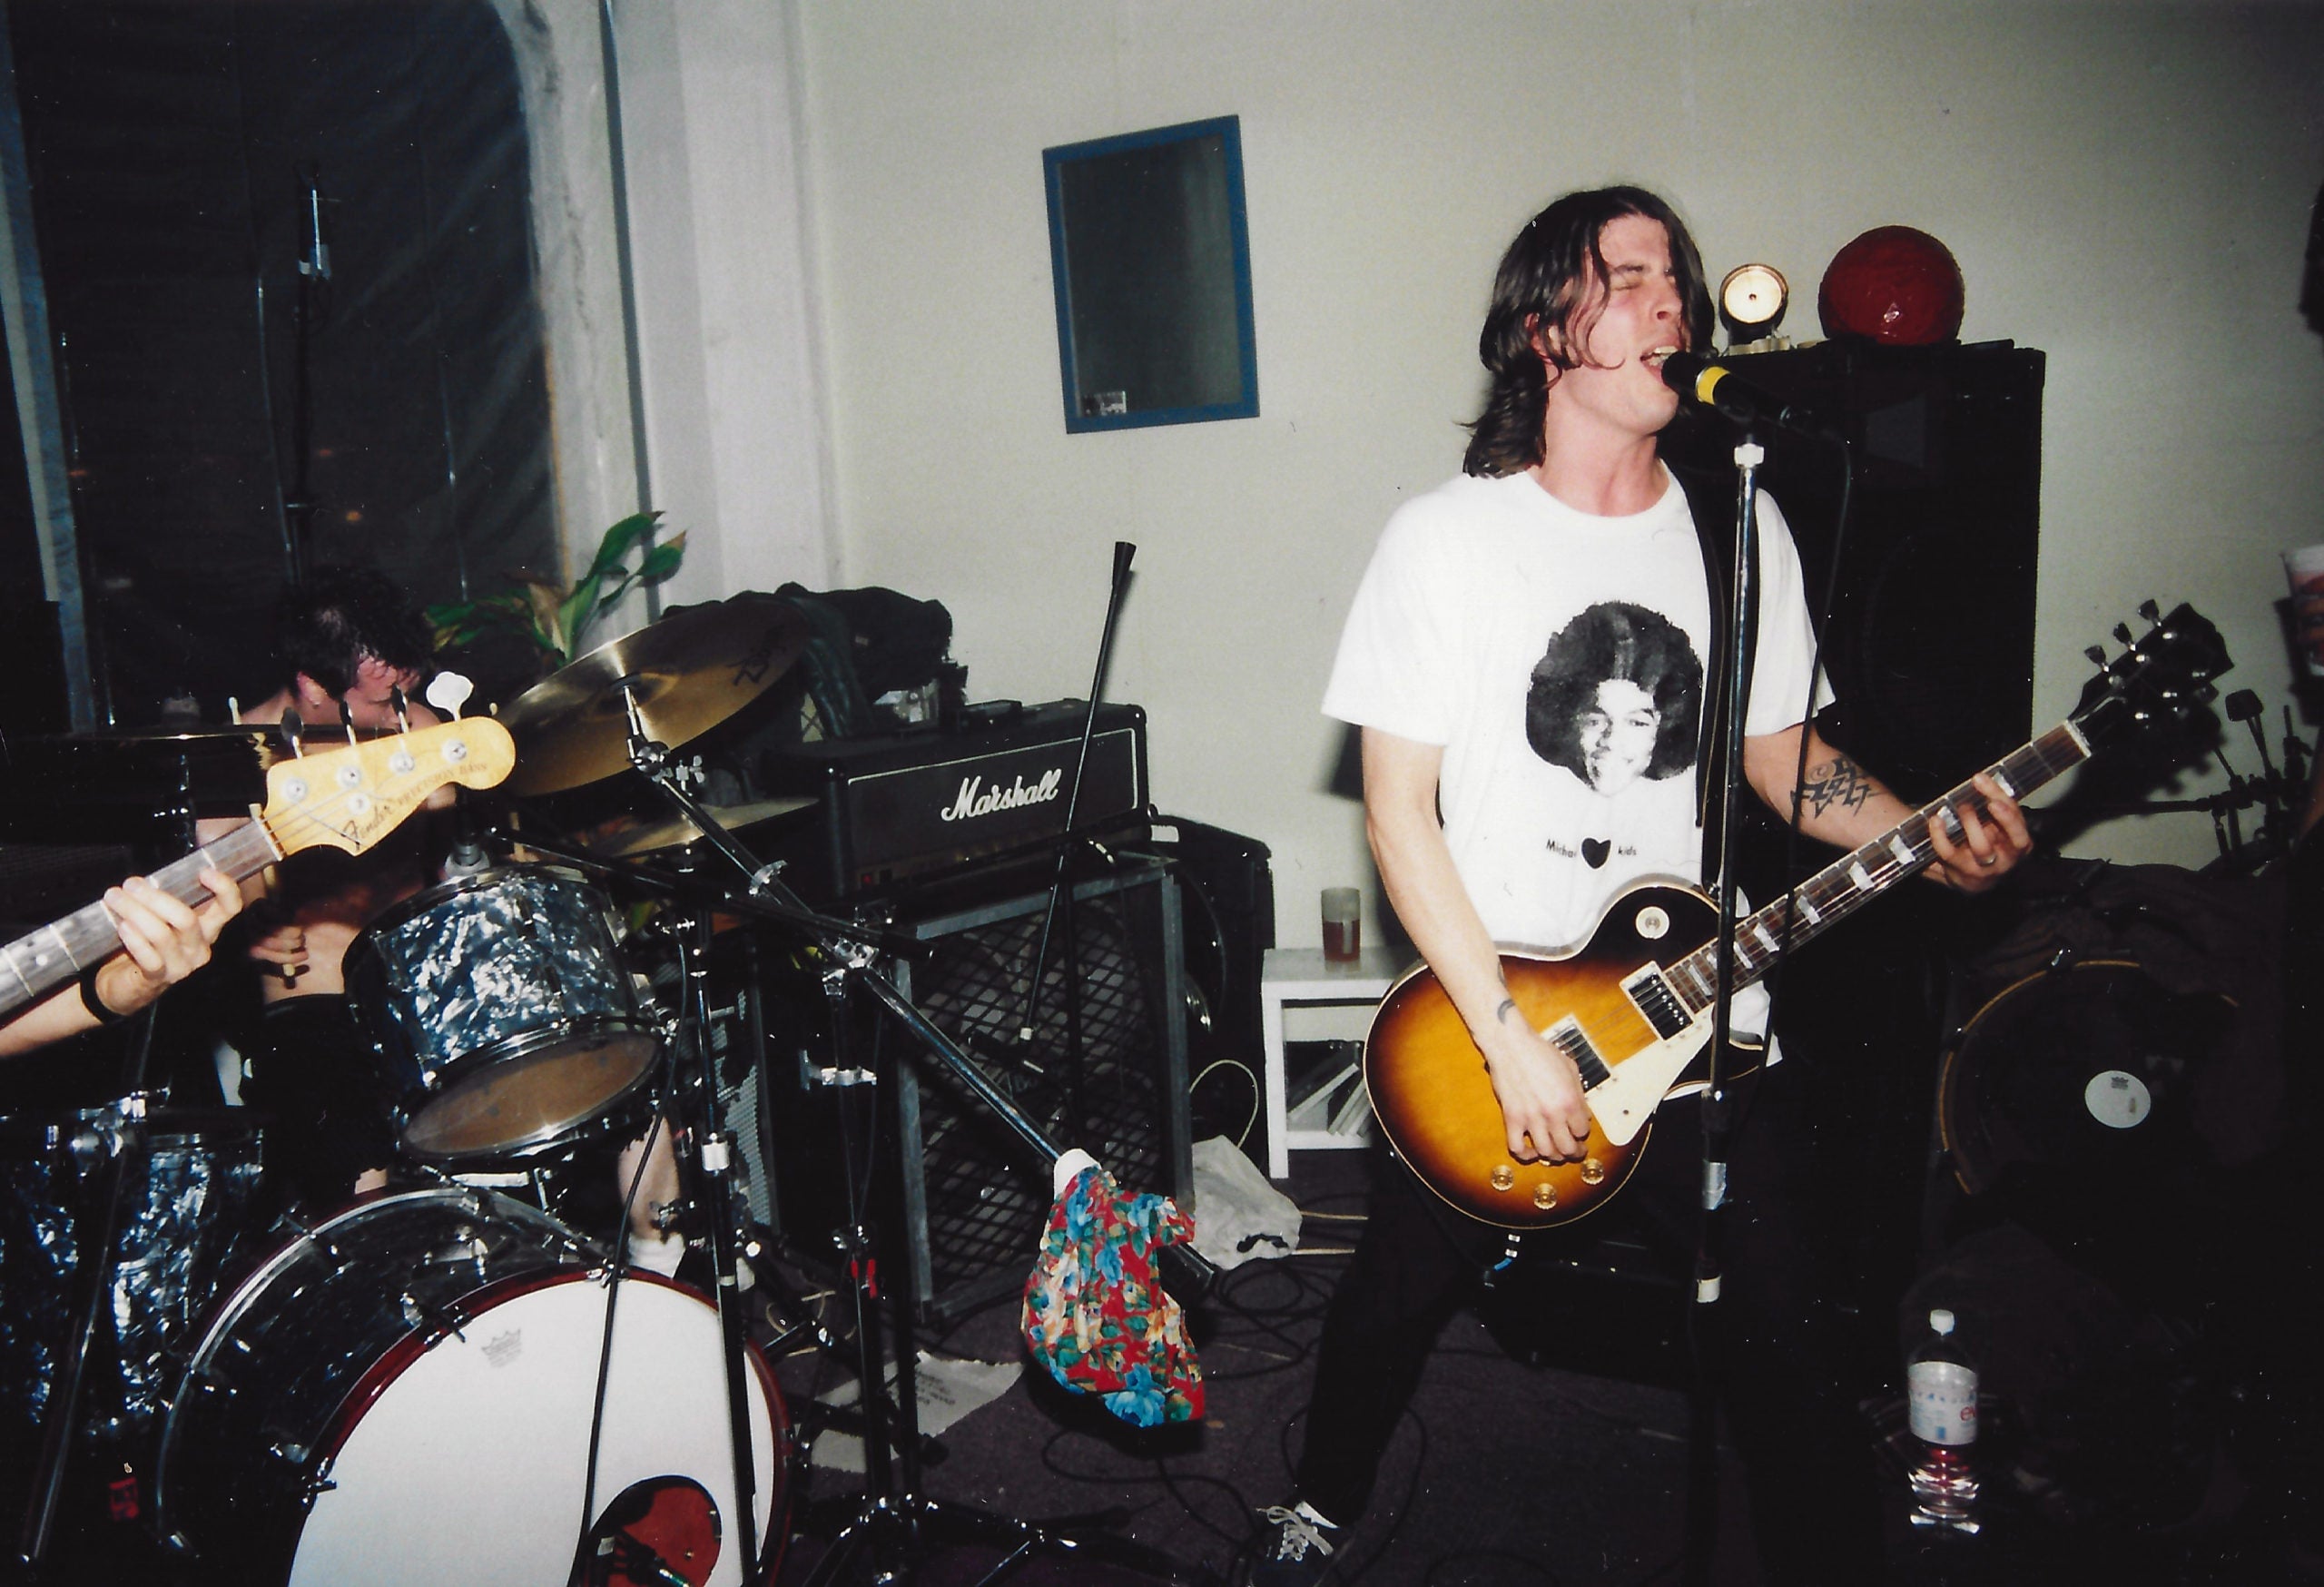 Dave Grohl: After Nirvana